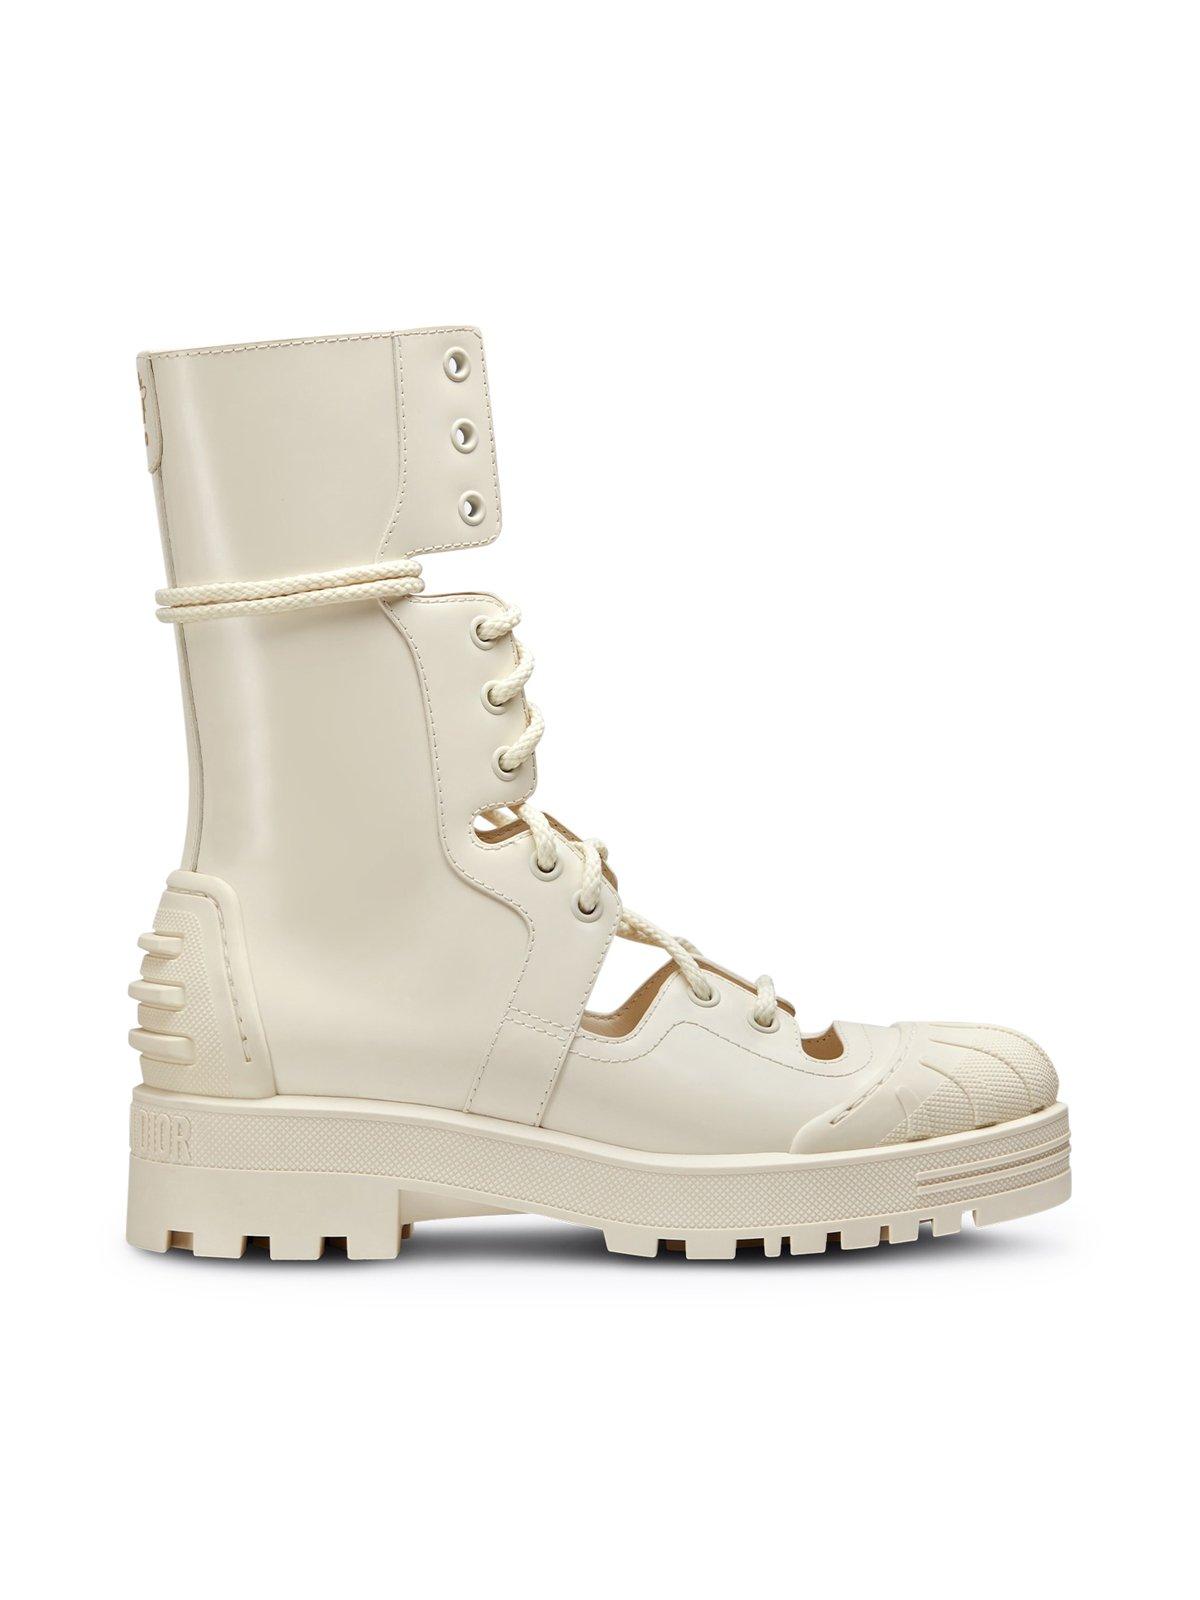 Dior Dioriron Boots in Natural | Lyst